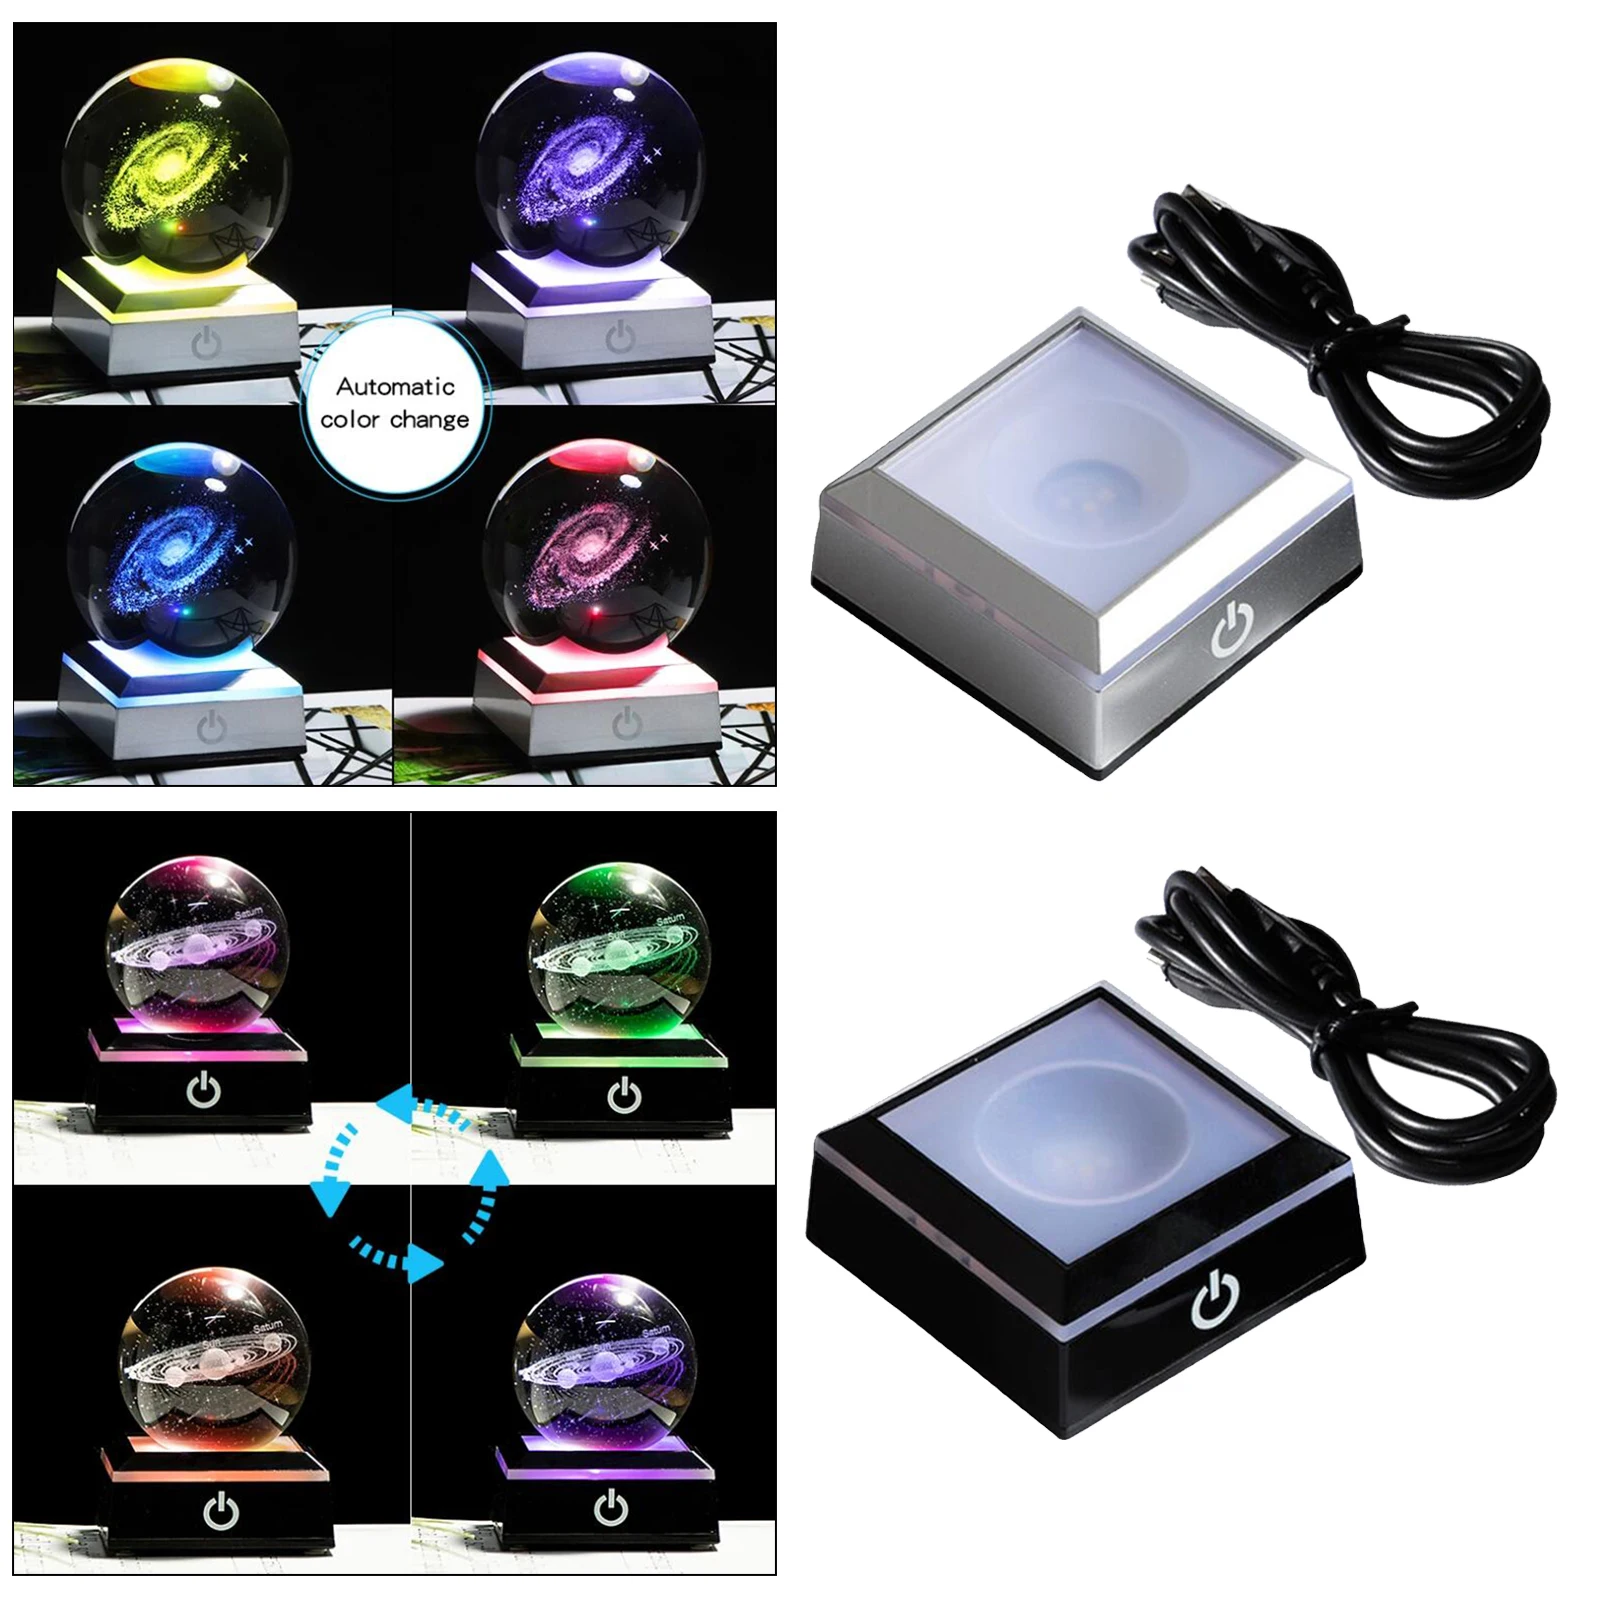 LED Colorful Light Change Base Light Rotating Crystal Display Base Stand for 3D Crystals Glass Home Decoration